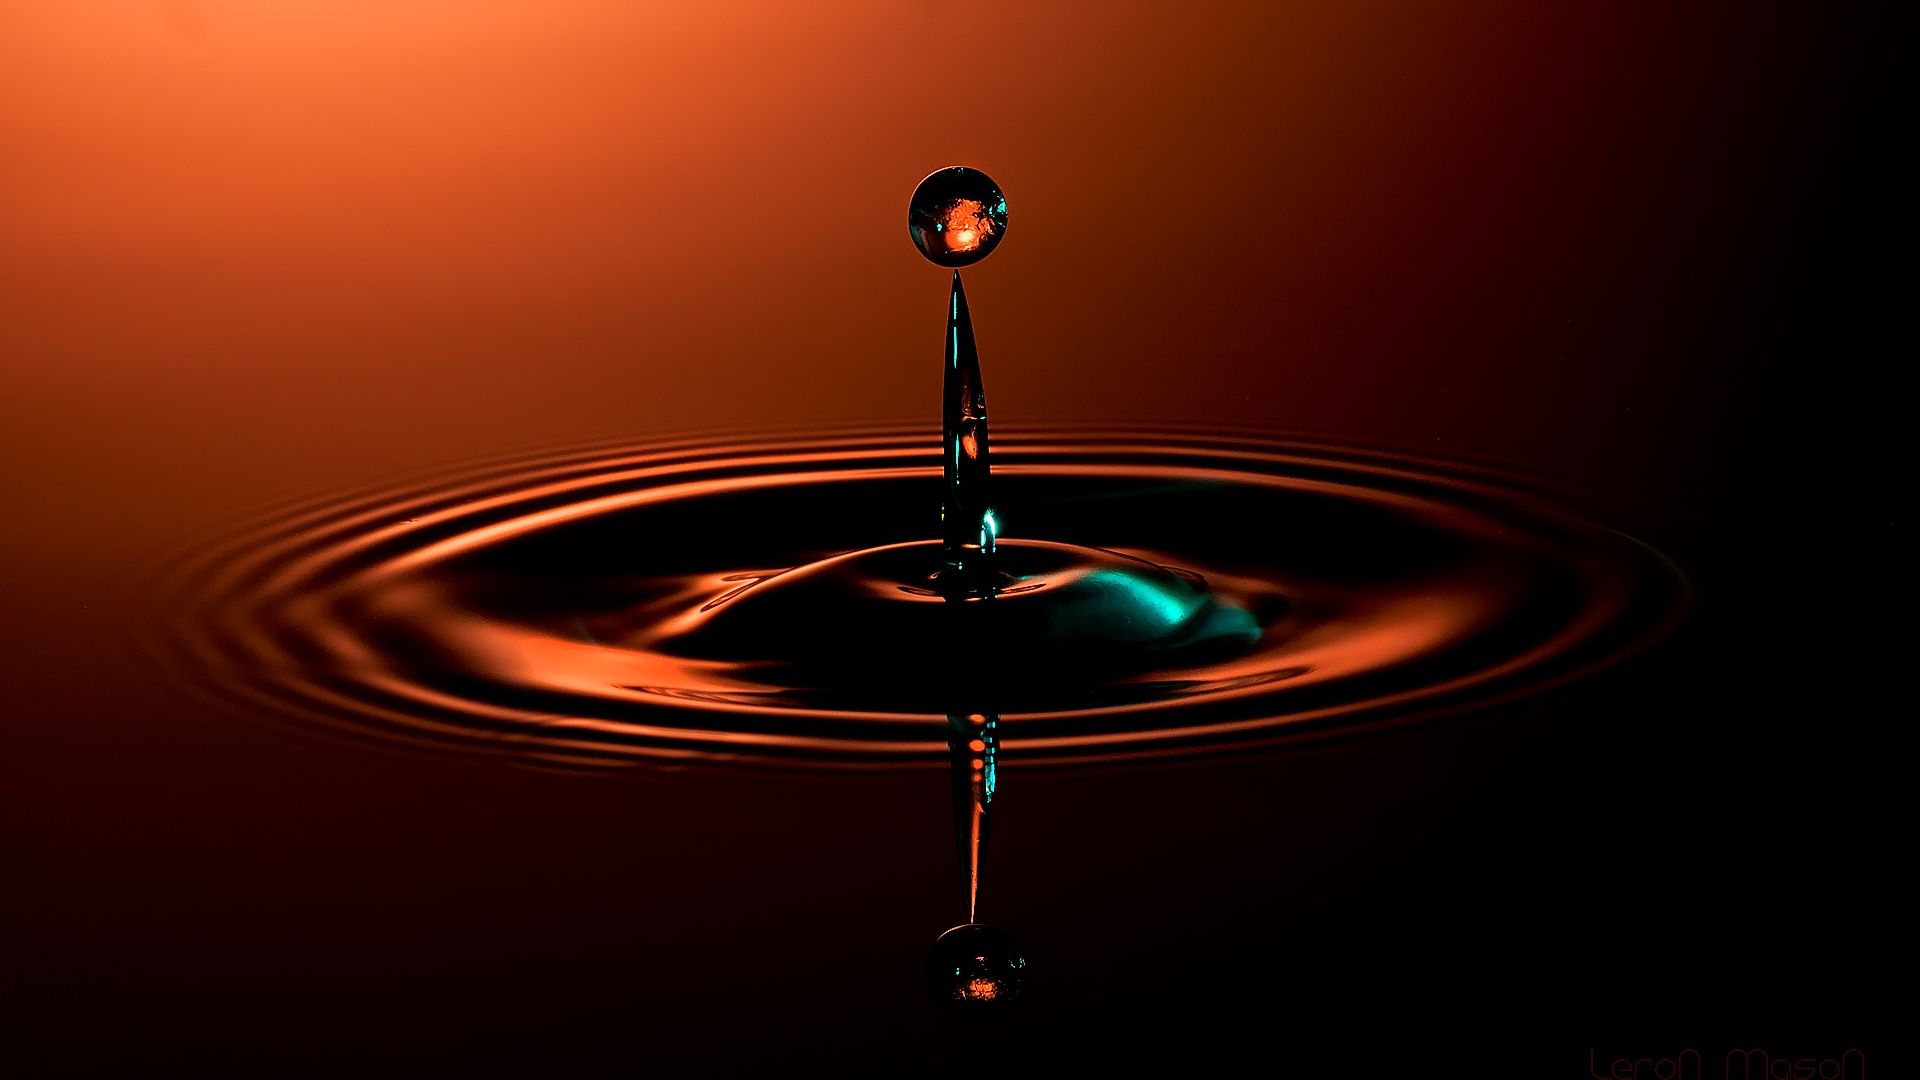  Water Drop Wallpapers Backgrounds Images Design